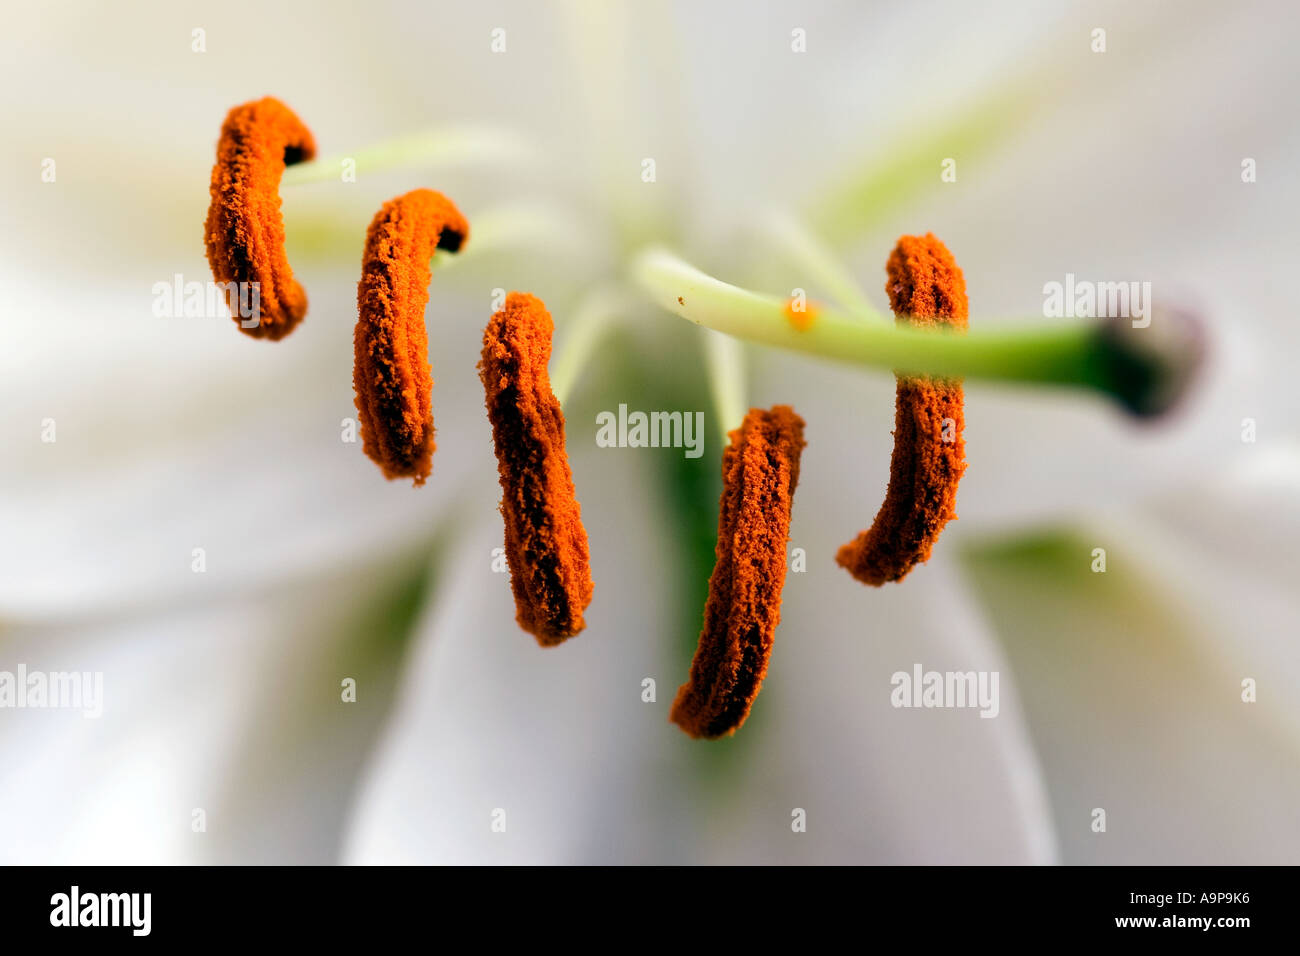 Protruding stamen in a white lily flower Stock Photo